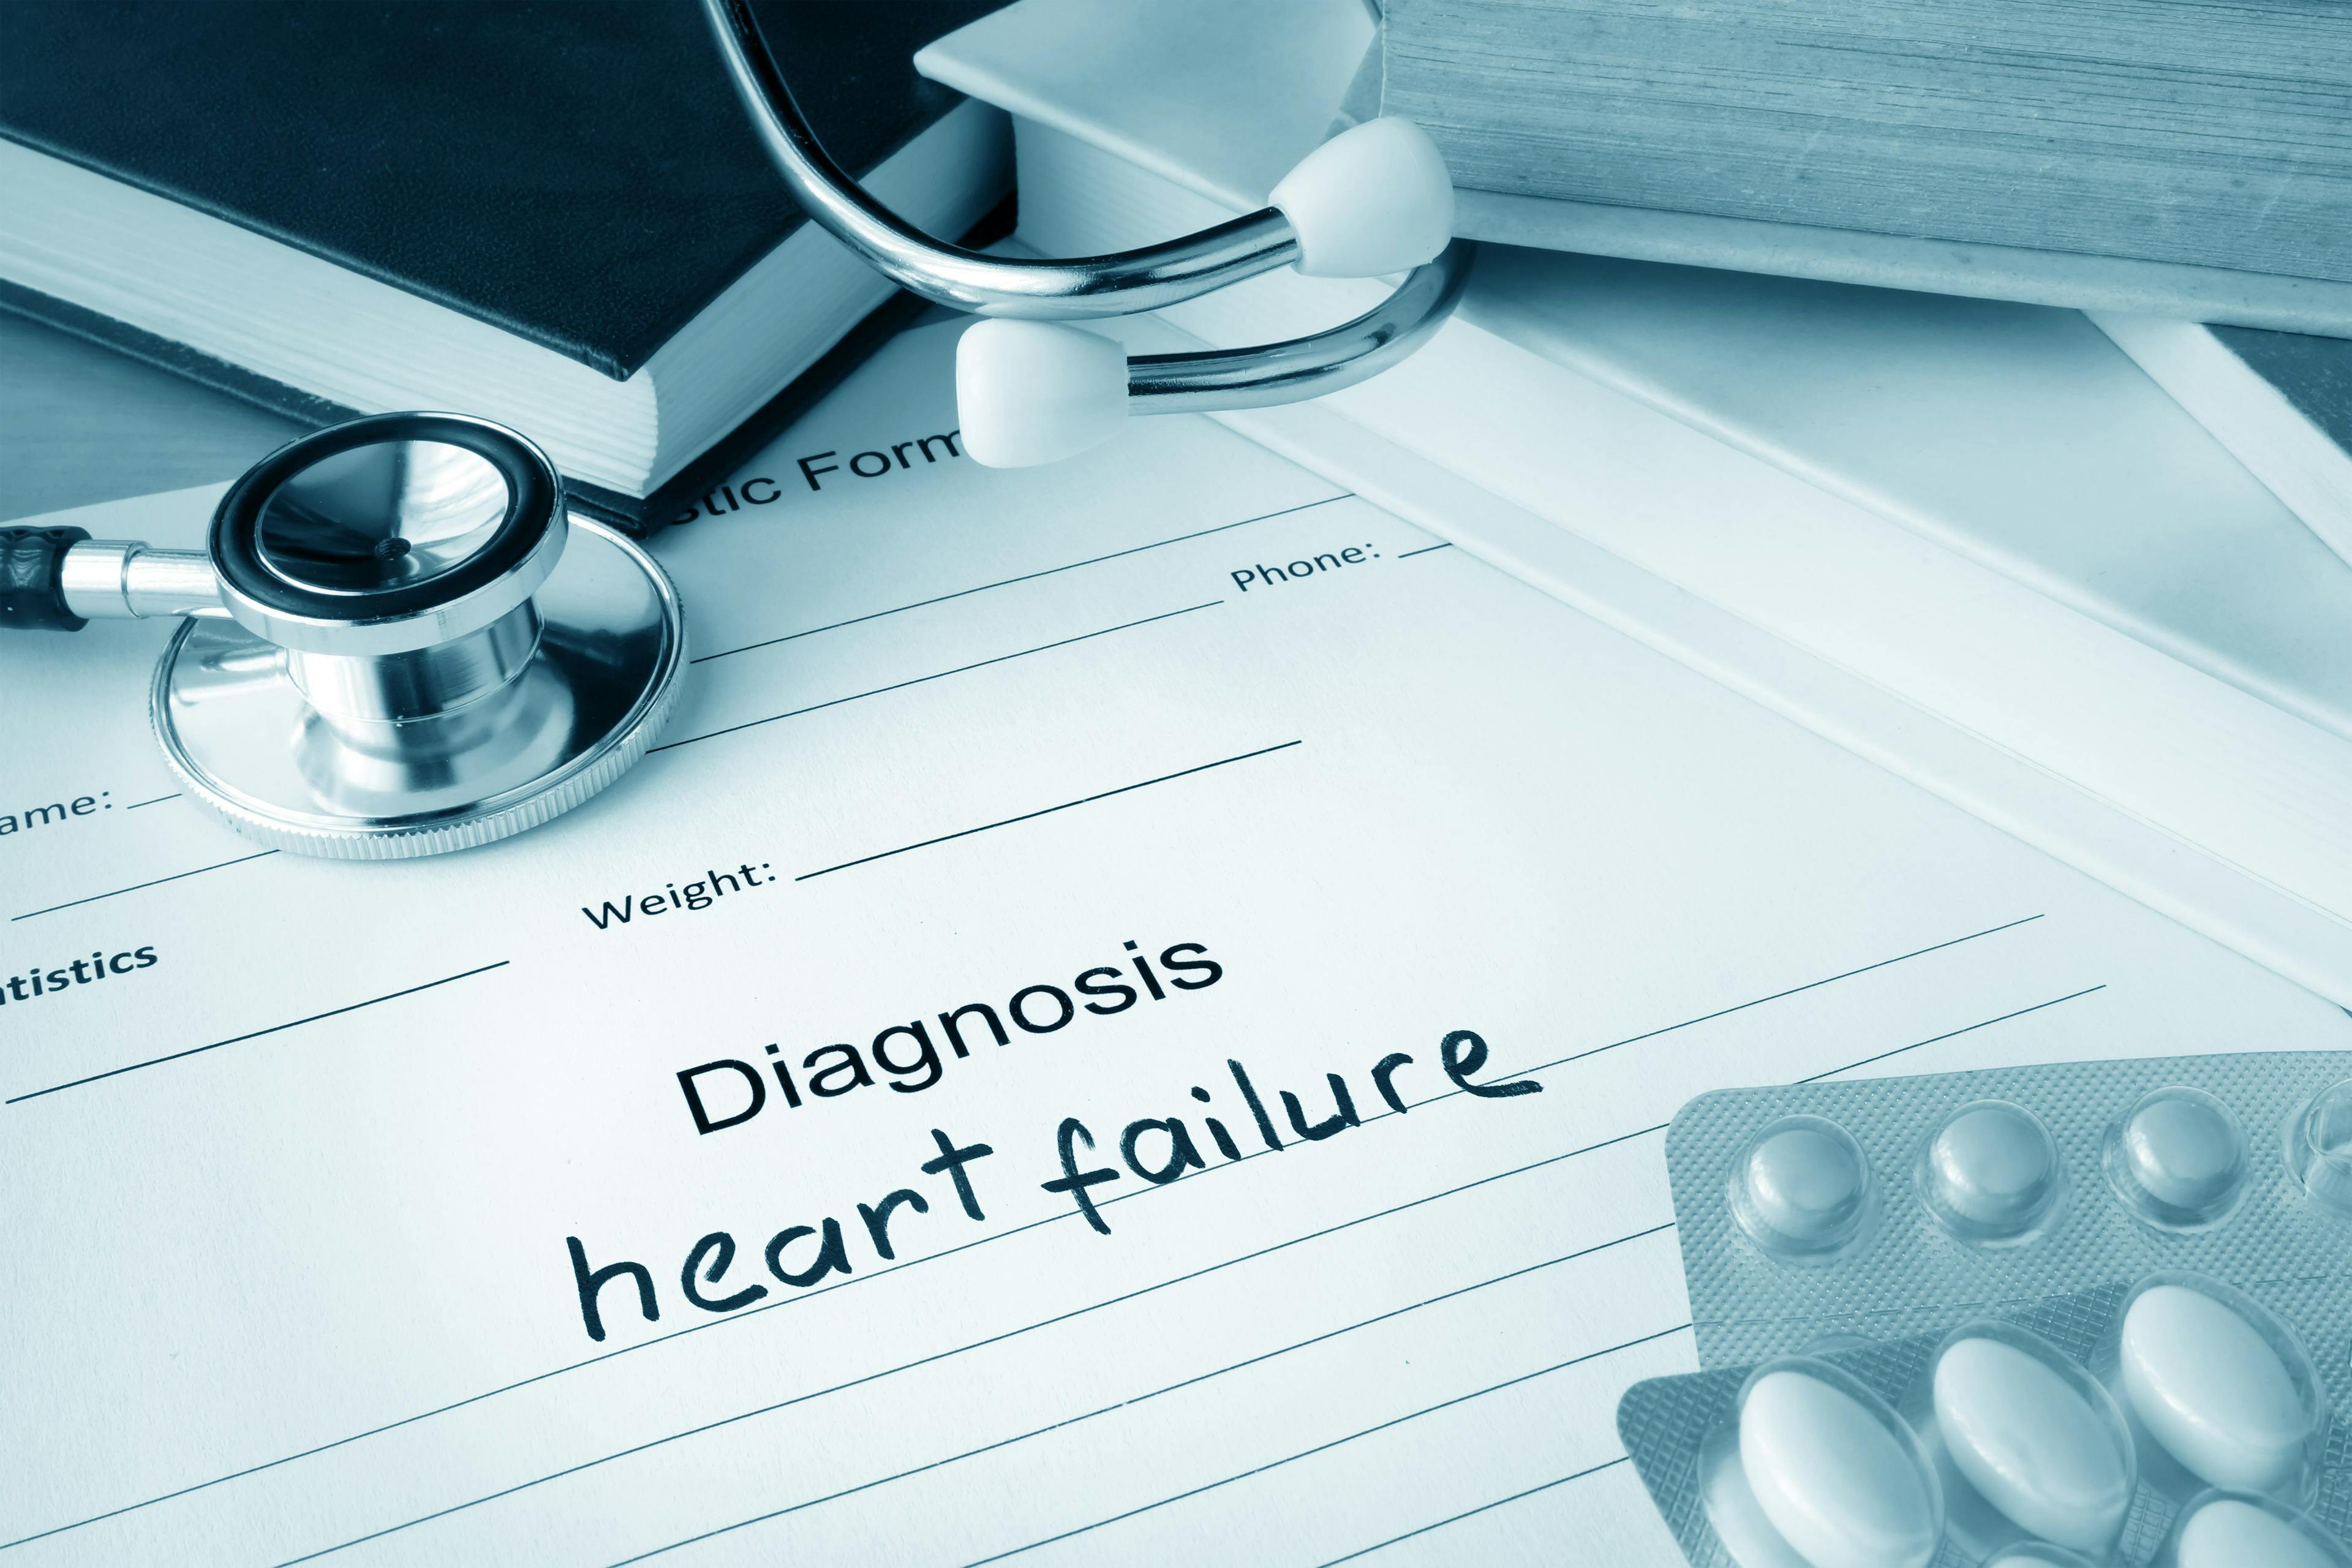 Stock imagery related to diagnosis of heart failure